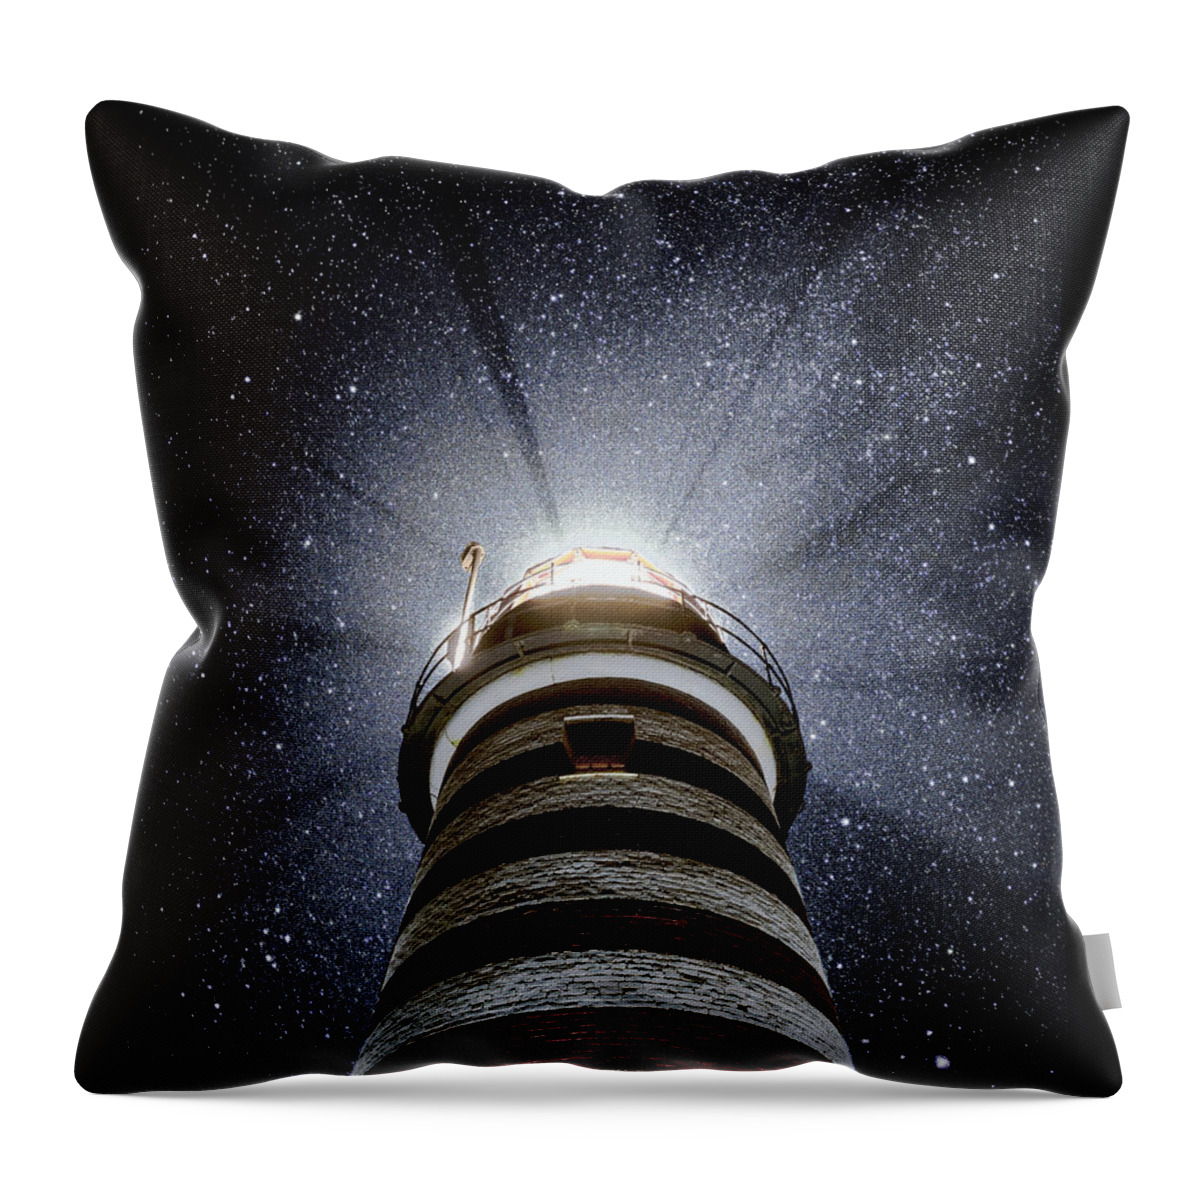 Lighthouse Throw Pillow featuring the photograph Beacon In The Night West Quoddy Head Lighthouse by Marty Saccone